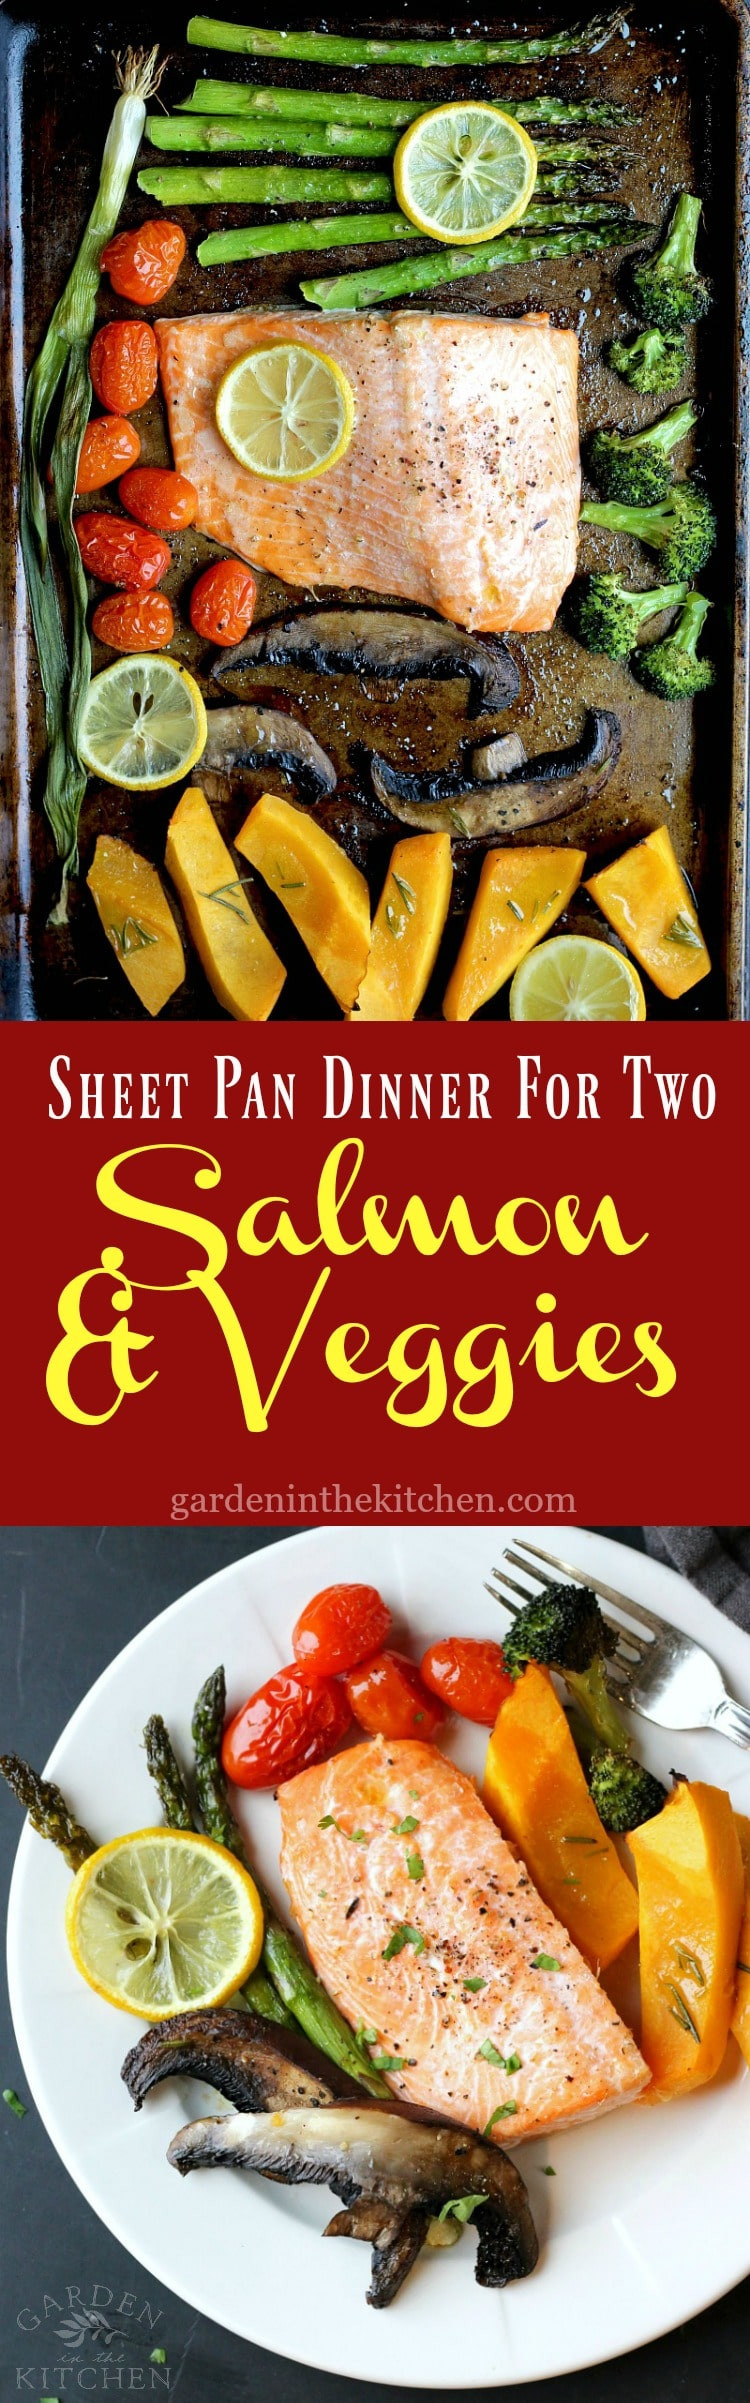 Salmon Dinners For Two
 Sheet Pan Dinner For Two Salmon & Veggies